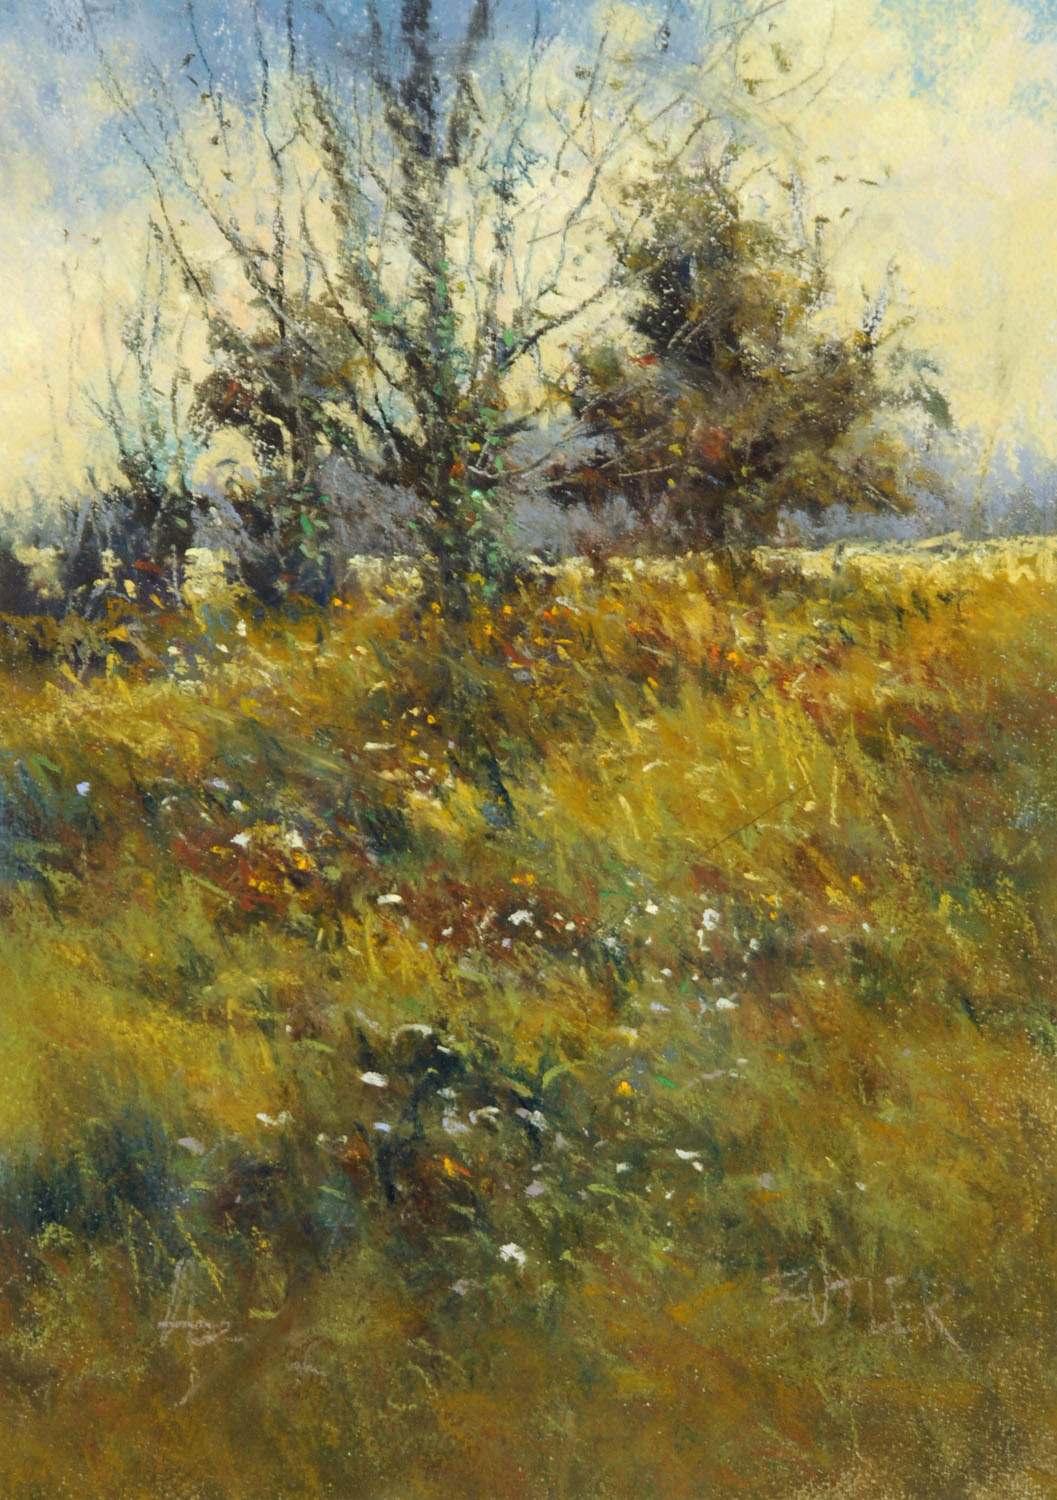 Aidan Butler, "Wild Grasses and Trees", signed, mixed media, 27.5 cm x 20 cm.